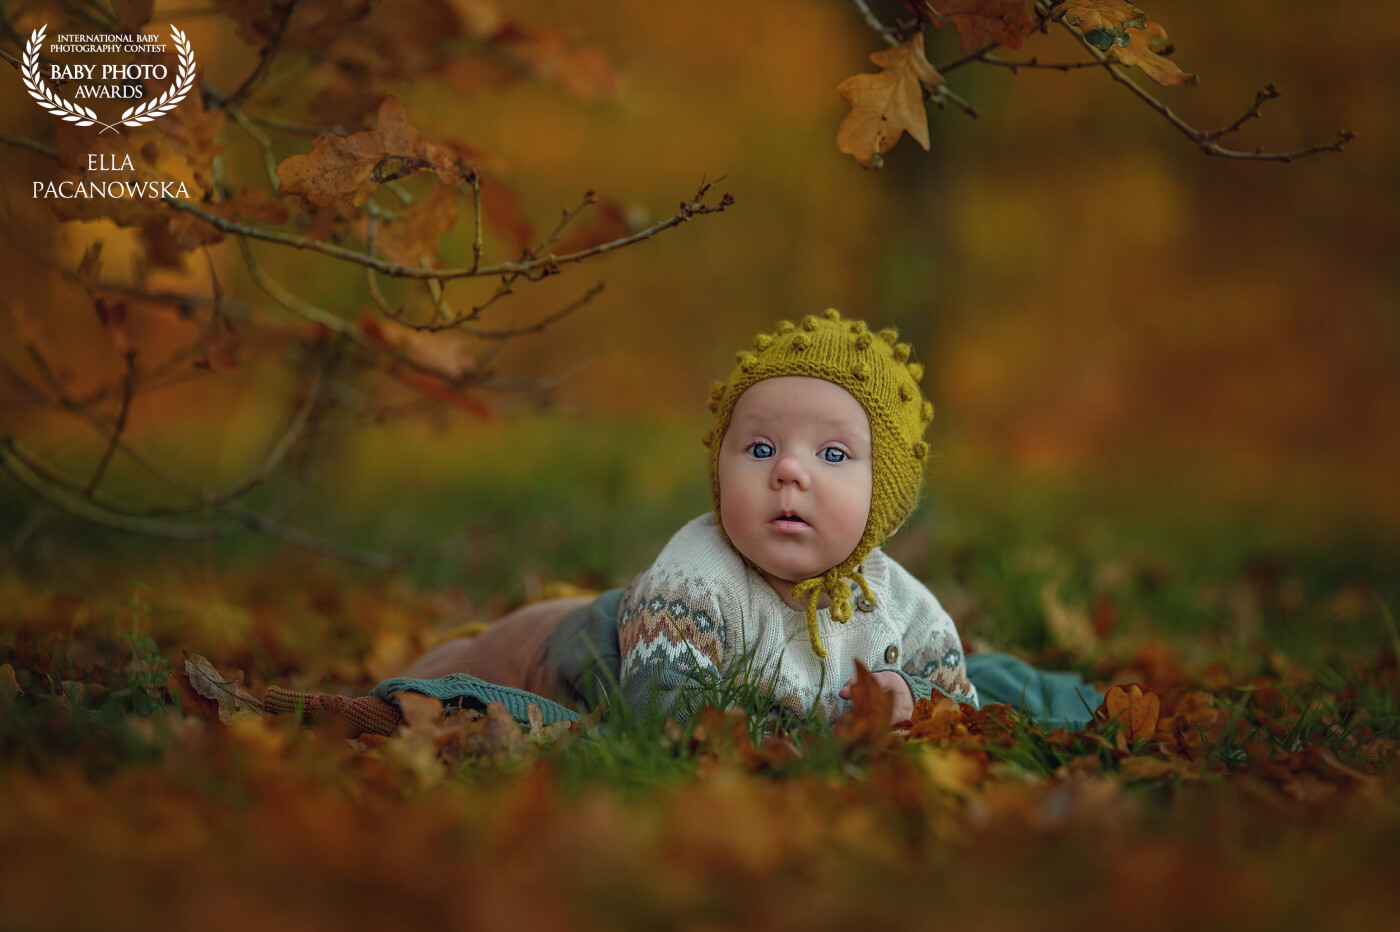 Every moment in life is special. Baby first Autumn ever captured!